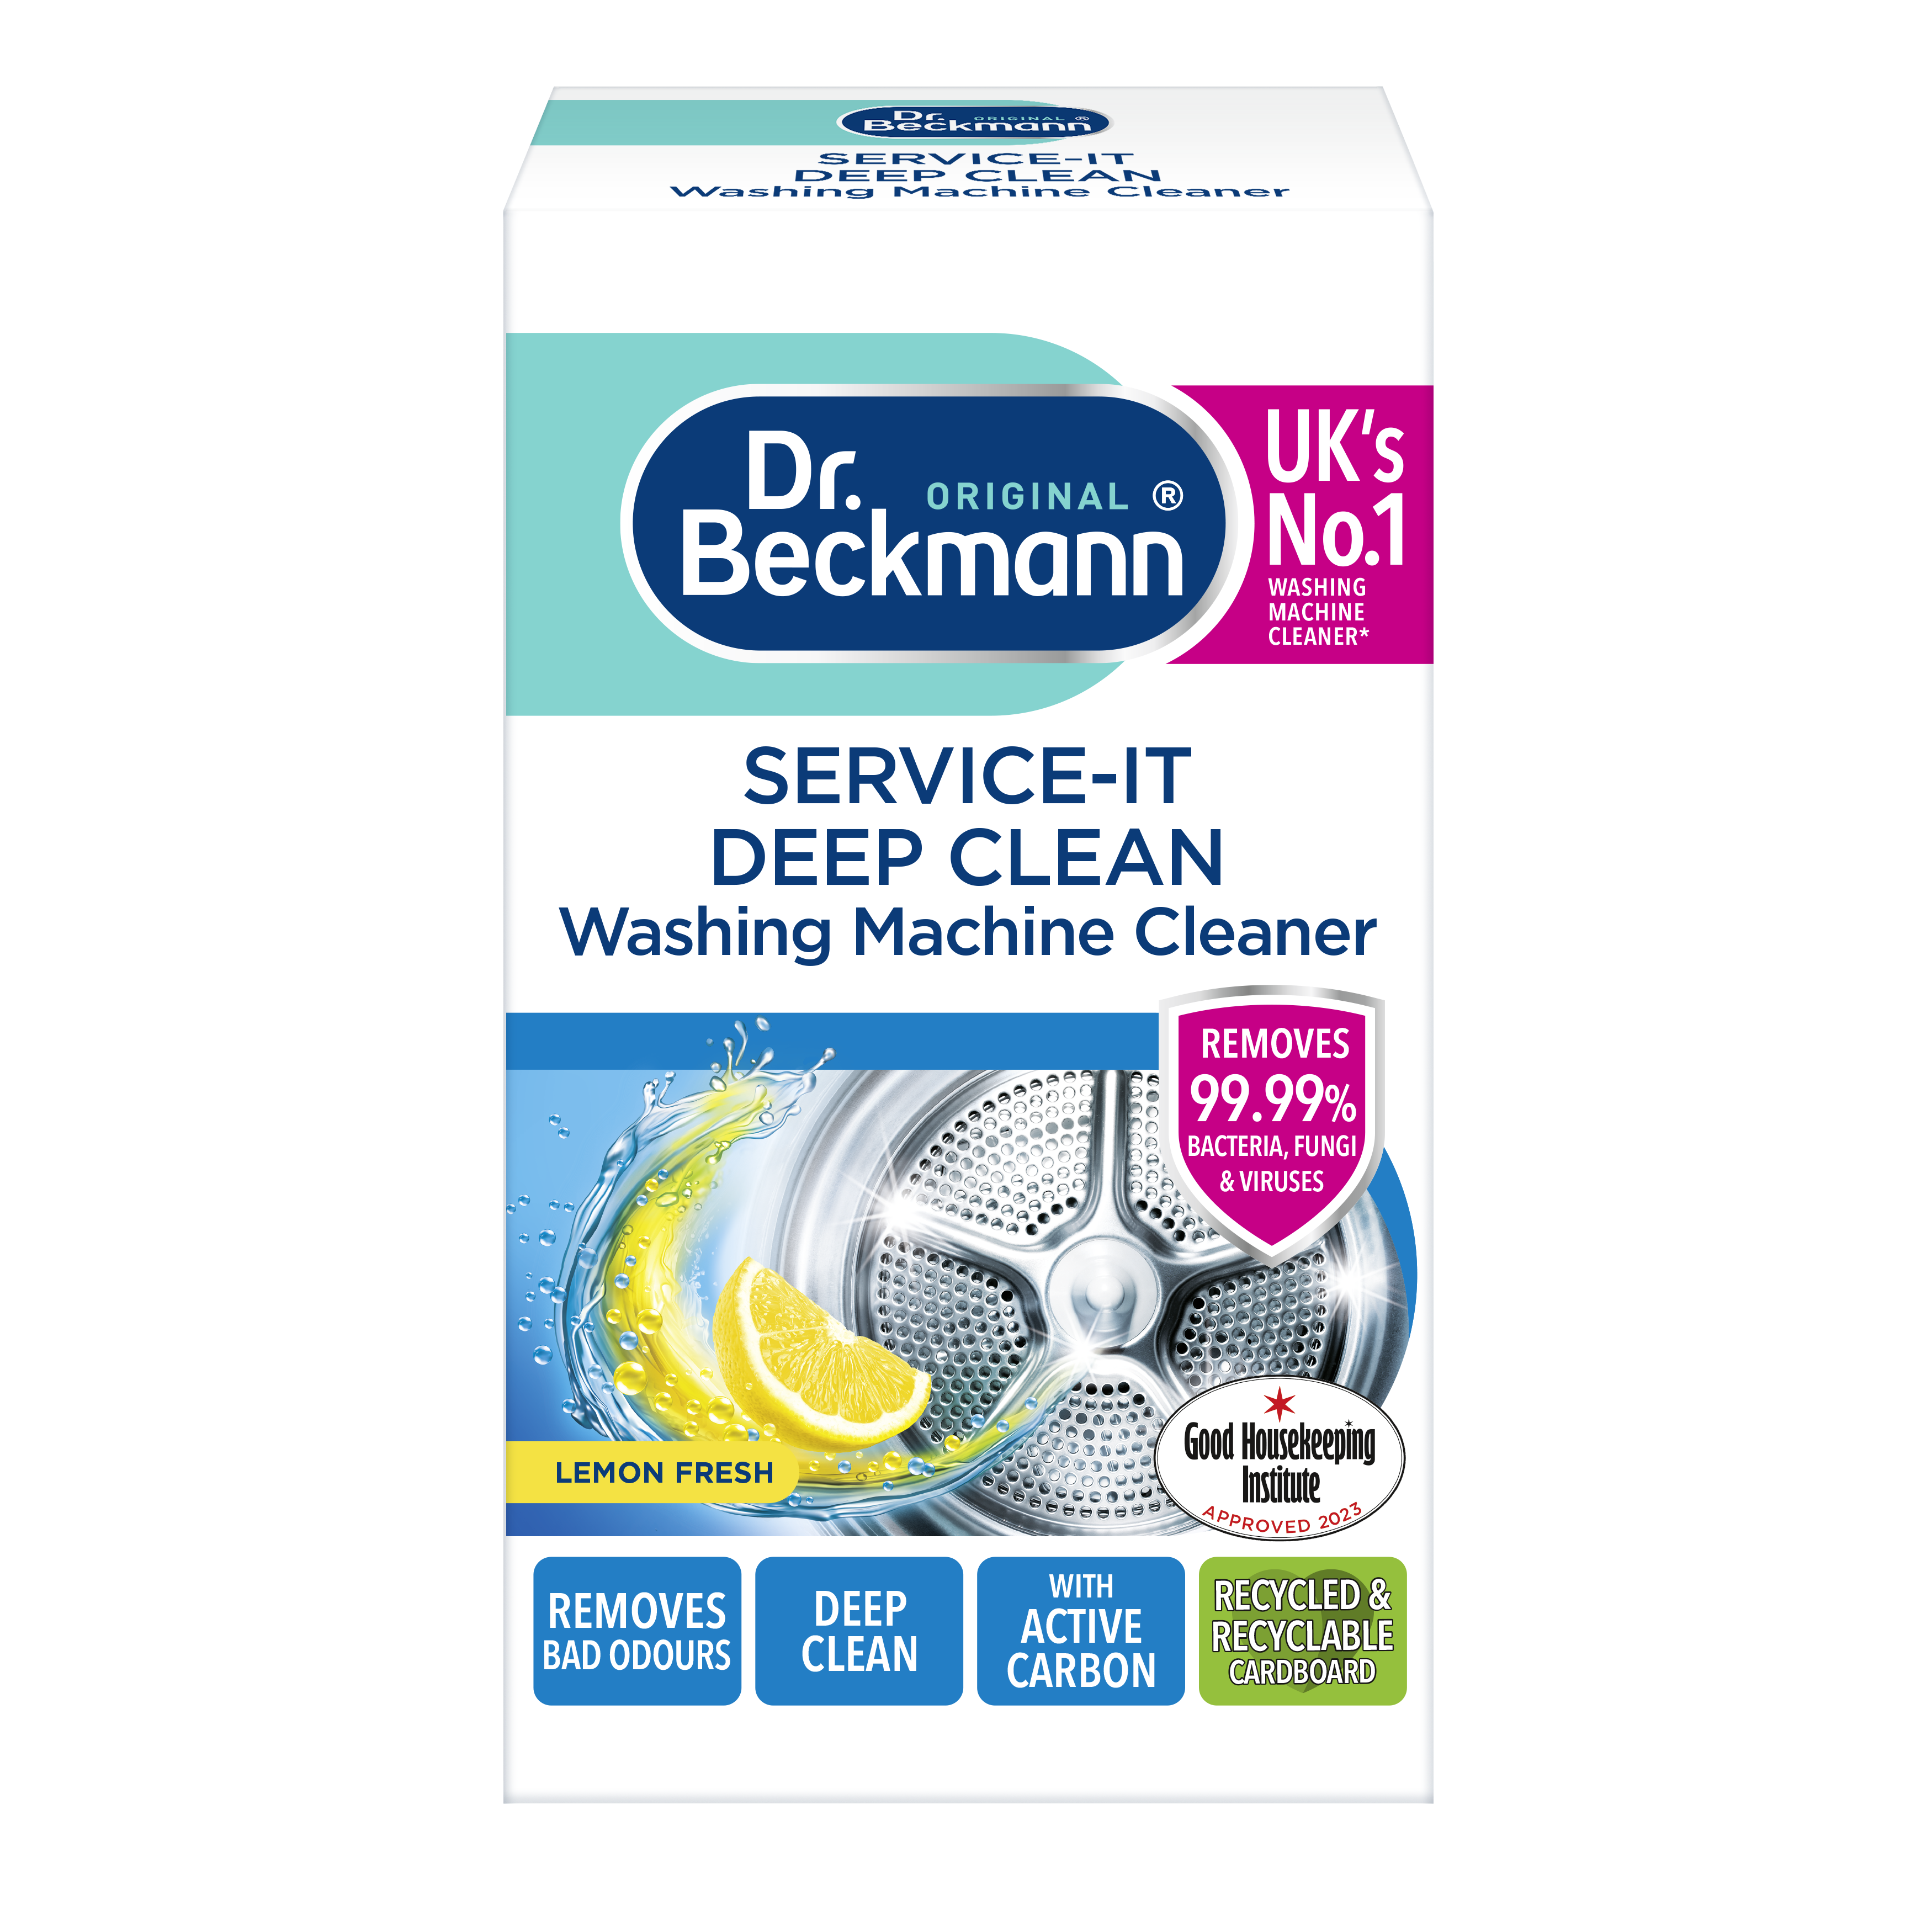 Keeping My Washing Machine Clean With Dr. Beckmann Service-It